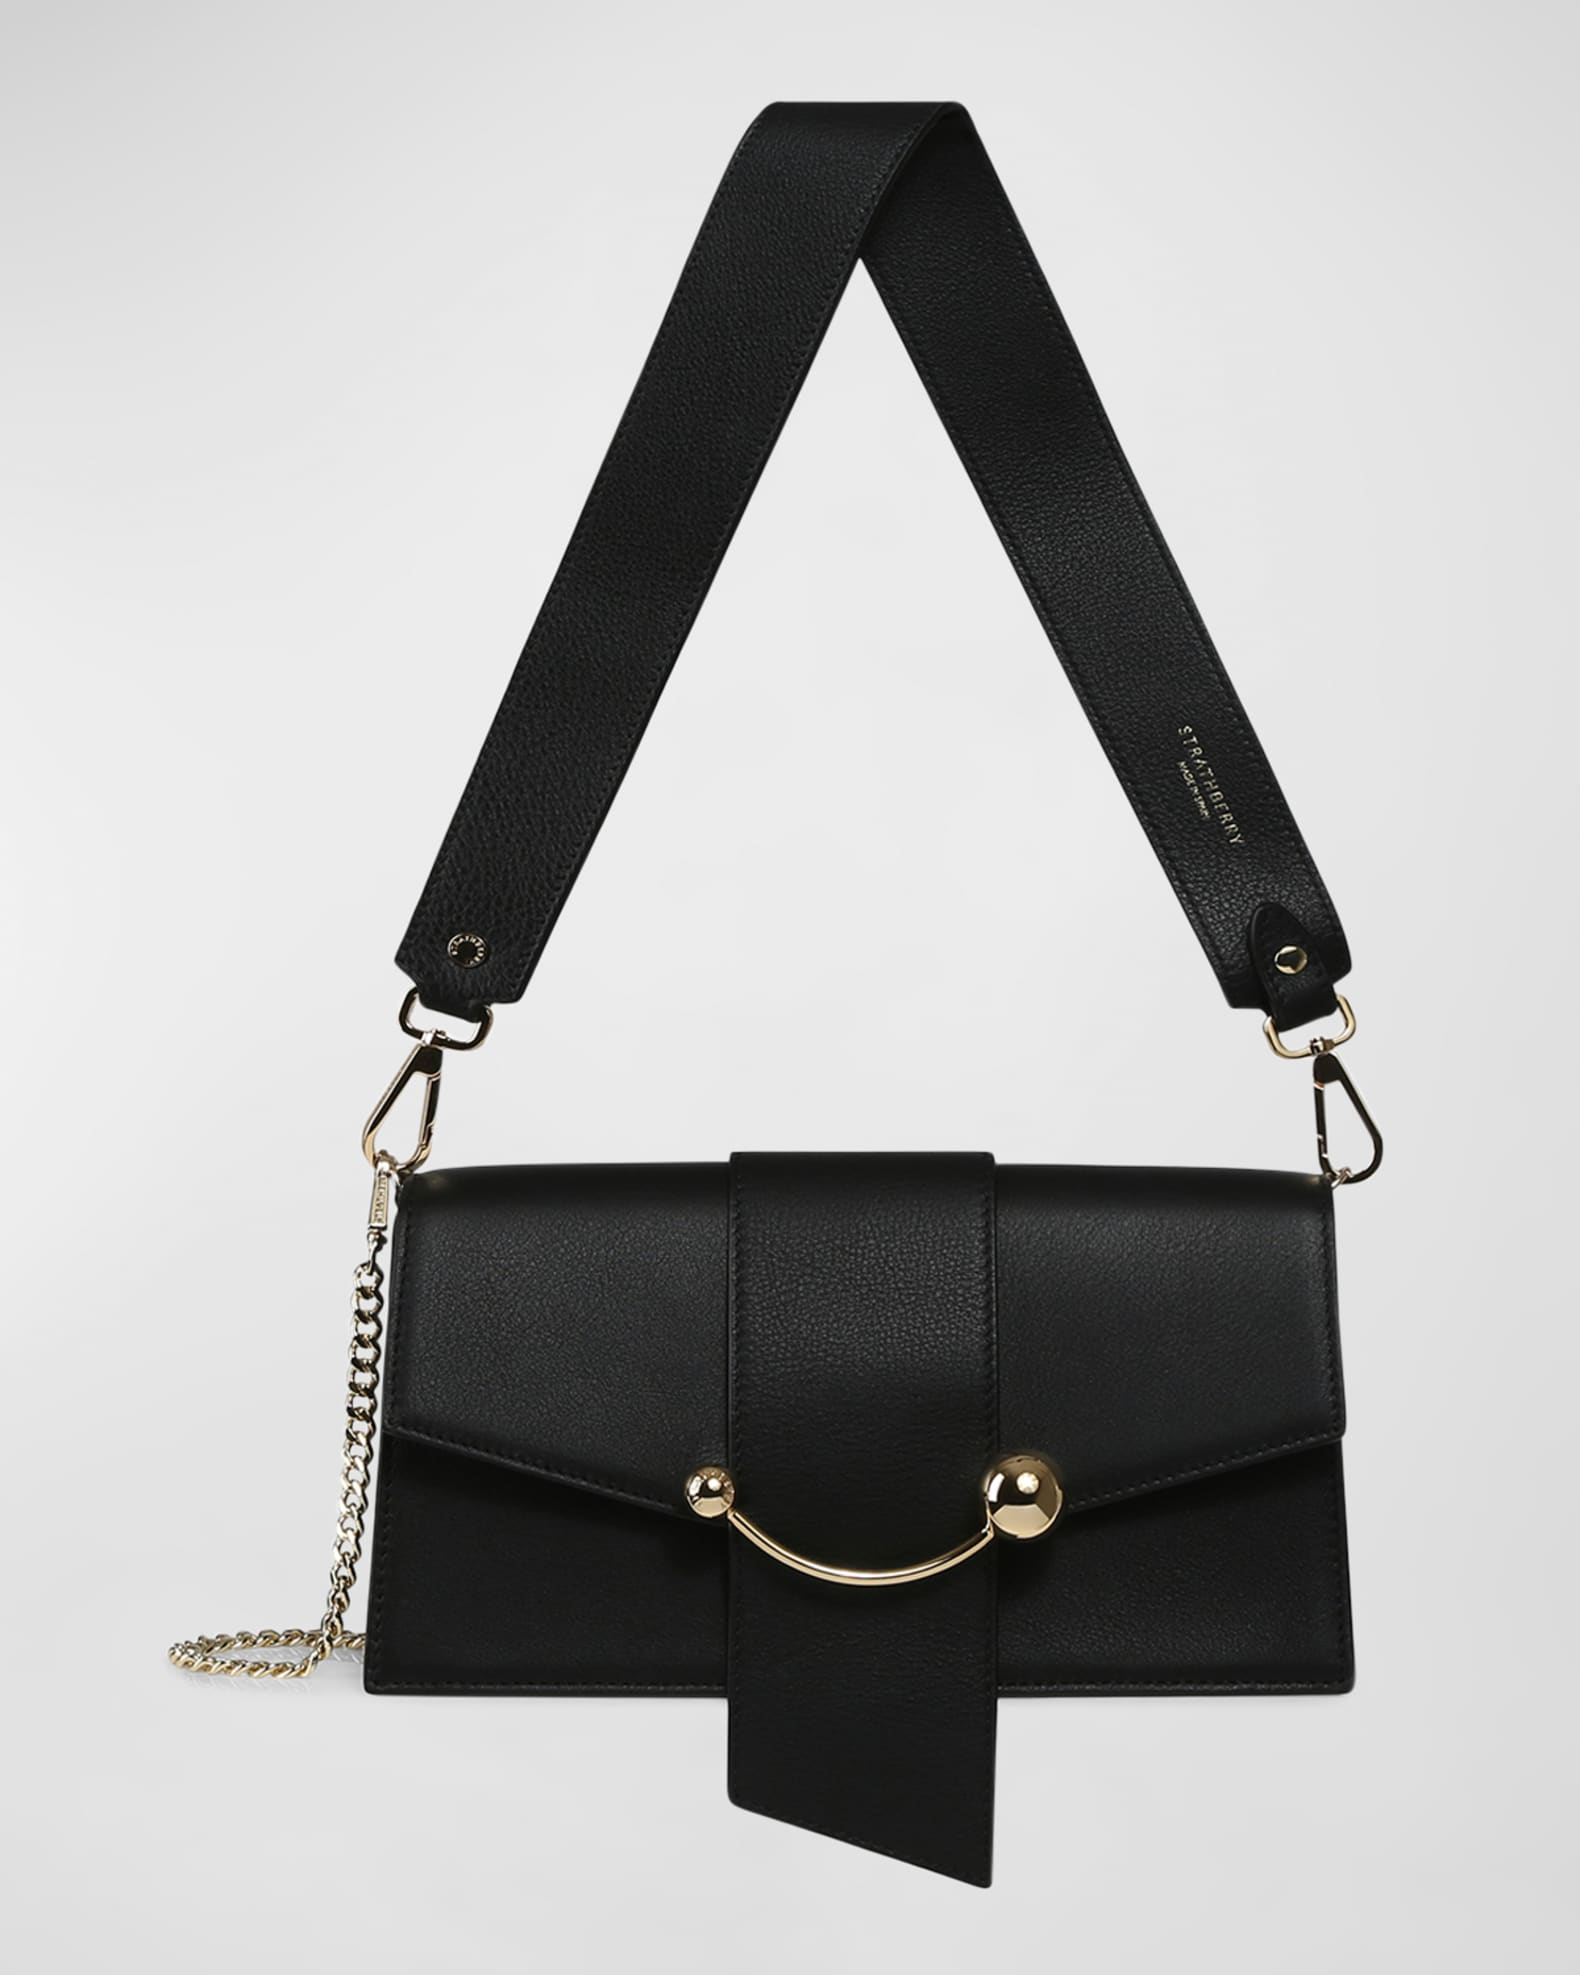 Strathberry 'Mini Crescent' Leather Bag - Os Black